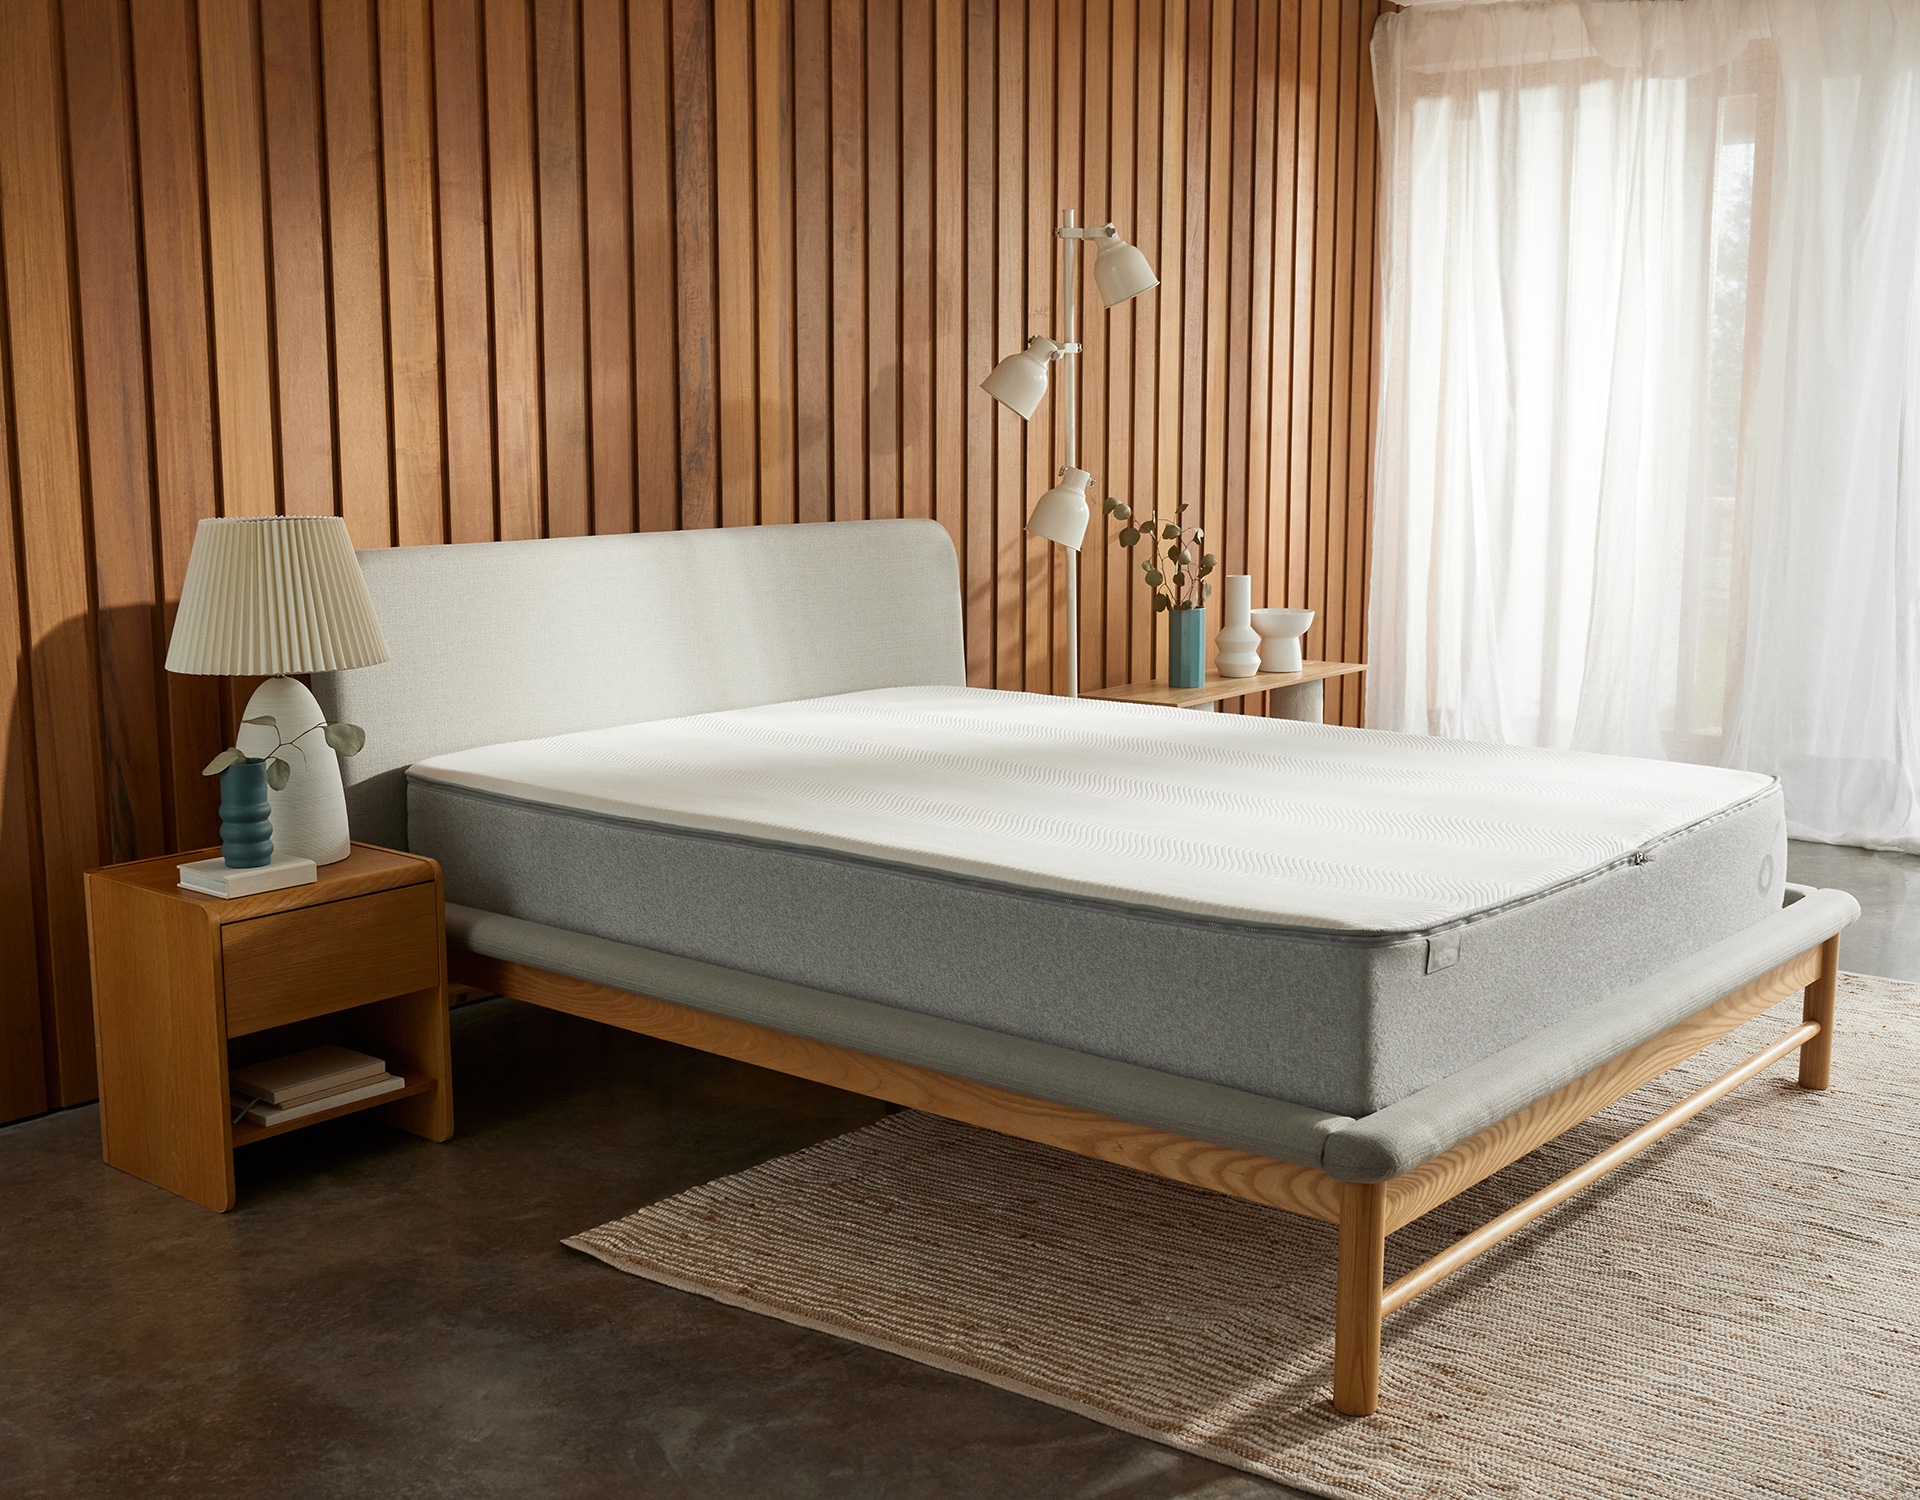 Beautiful Koala mattress without springs in a clean, bright room